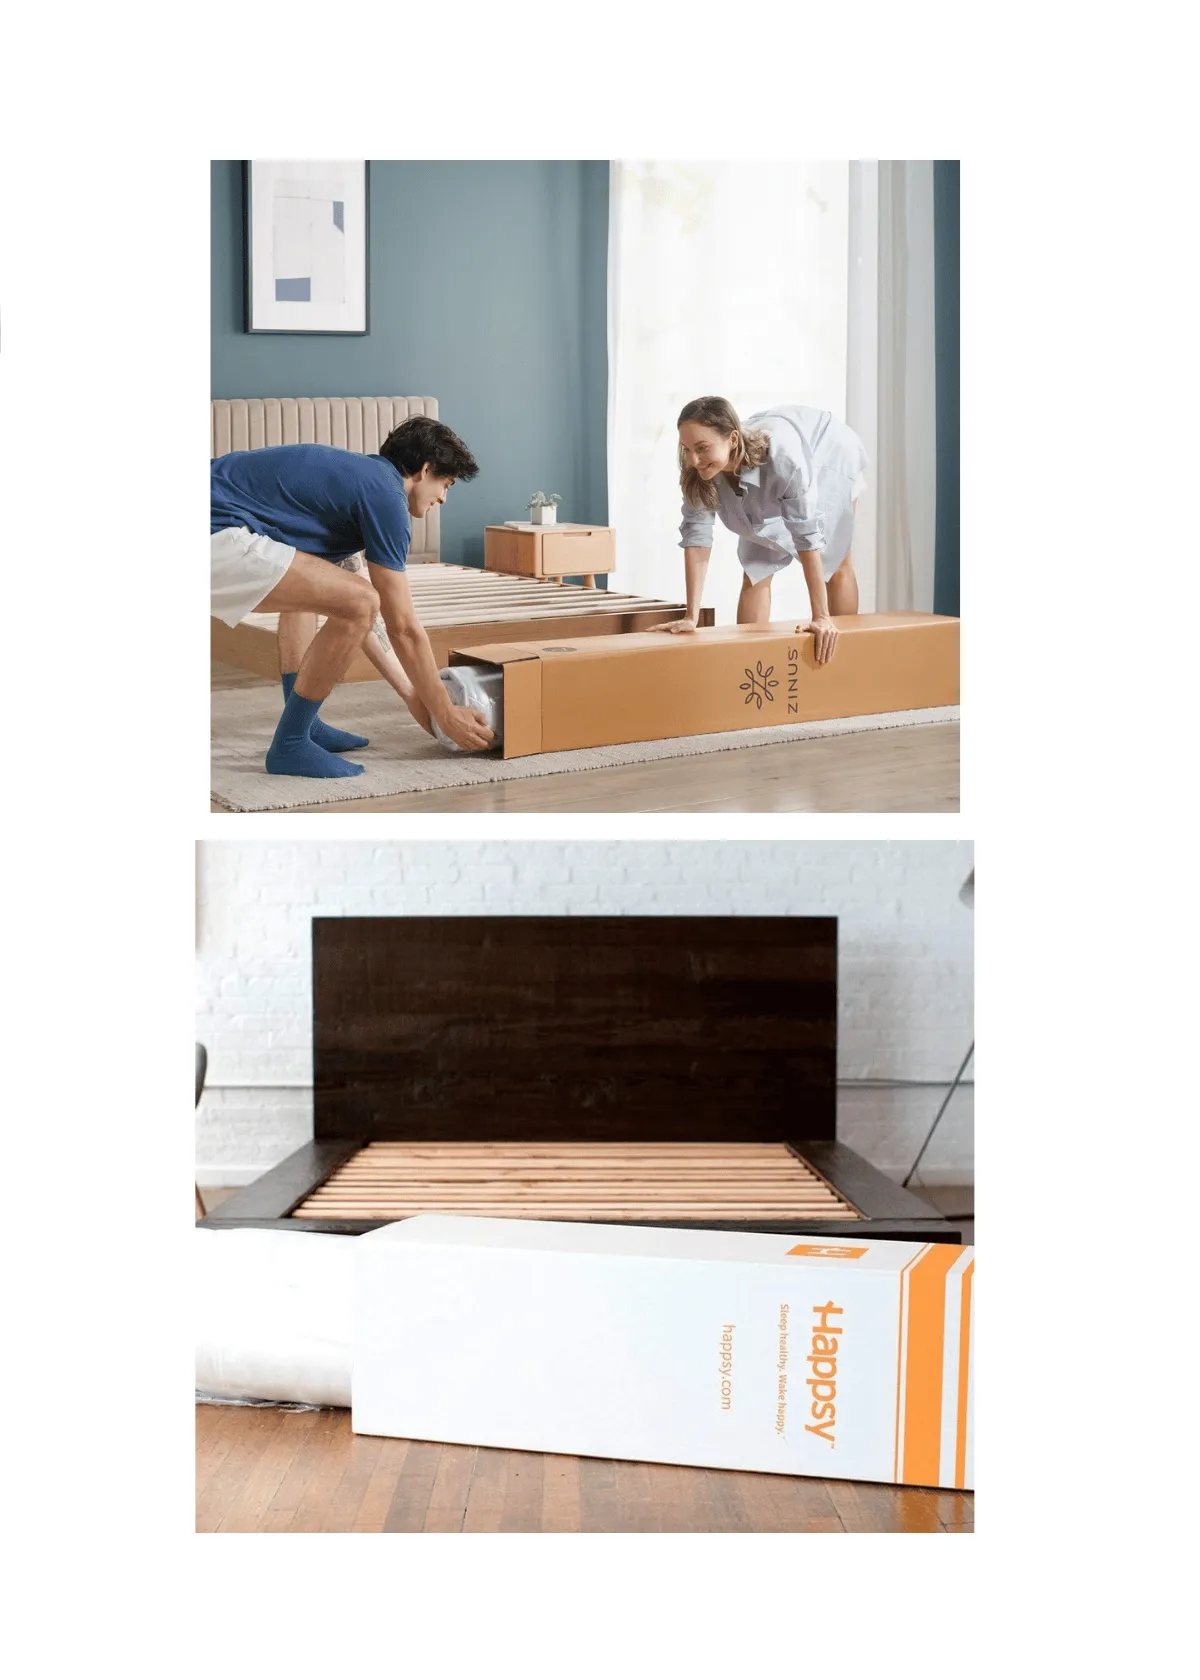 "Mattress Delivery | The Guide to Getting Your New Bed Hassle-Free"